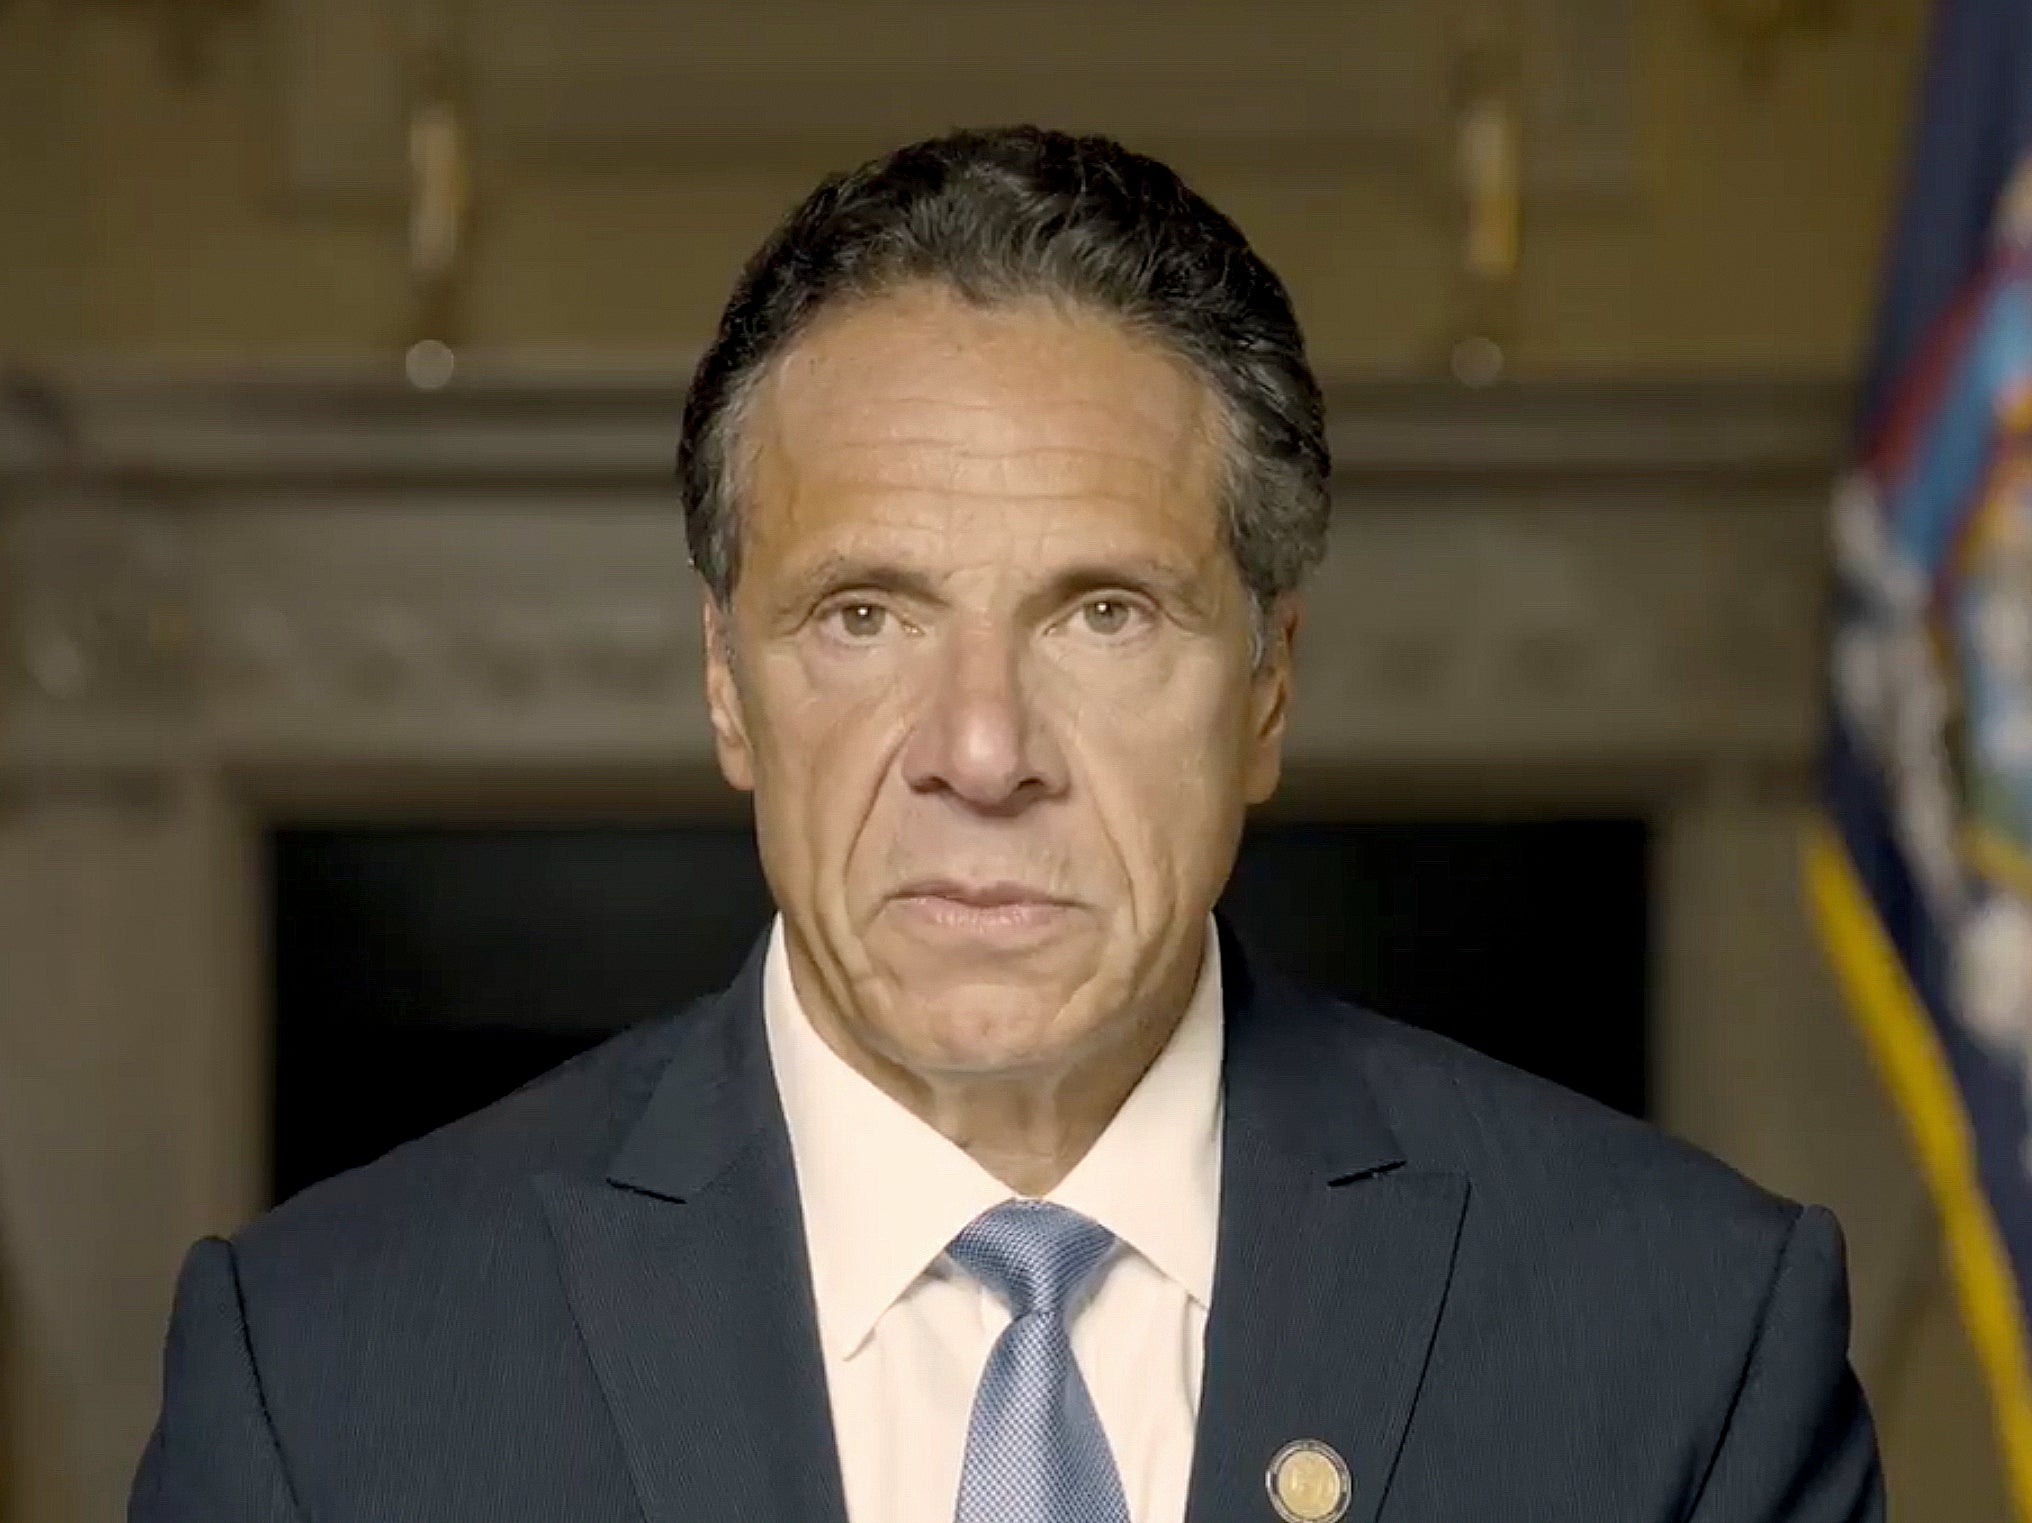 Andrew Cuomo makes a statement on a pre-recorded video released, Tuesday3 August 2021, in New York